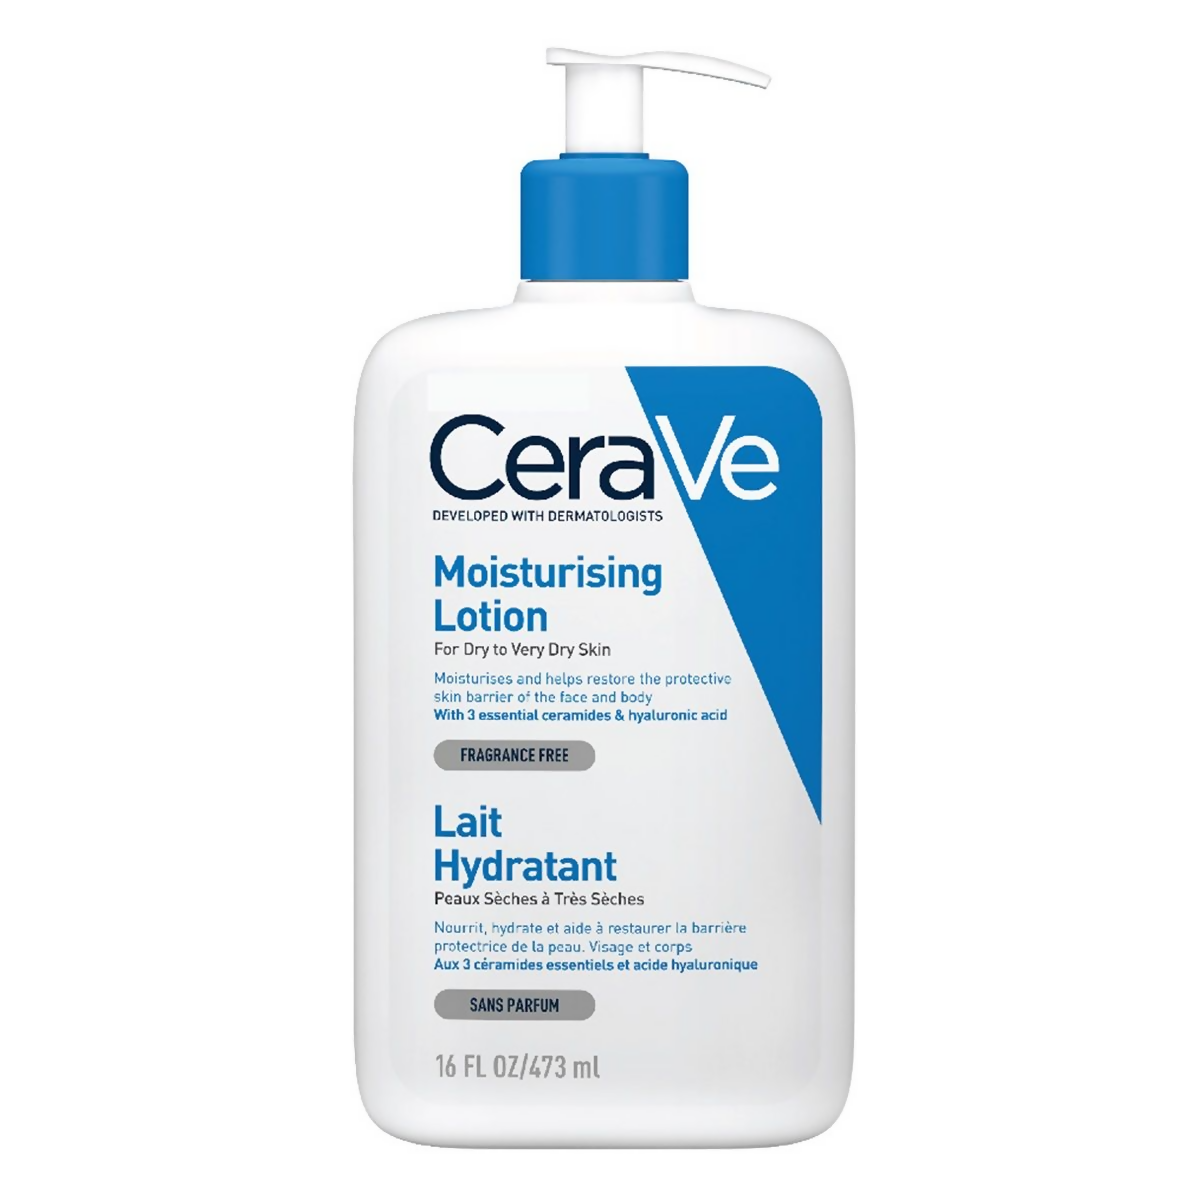 Cerave Moisturising Lotion for Dry to Very Dry Skin - BUDNEN